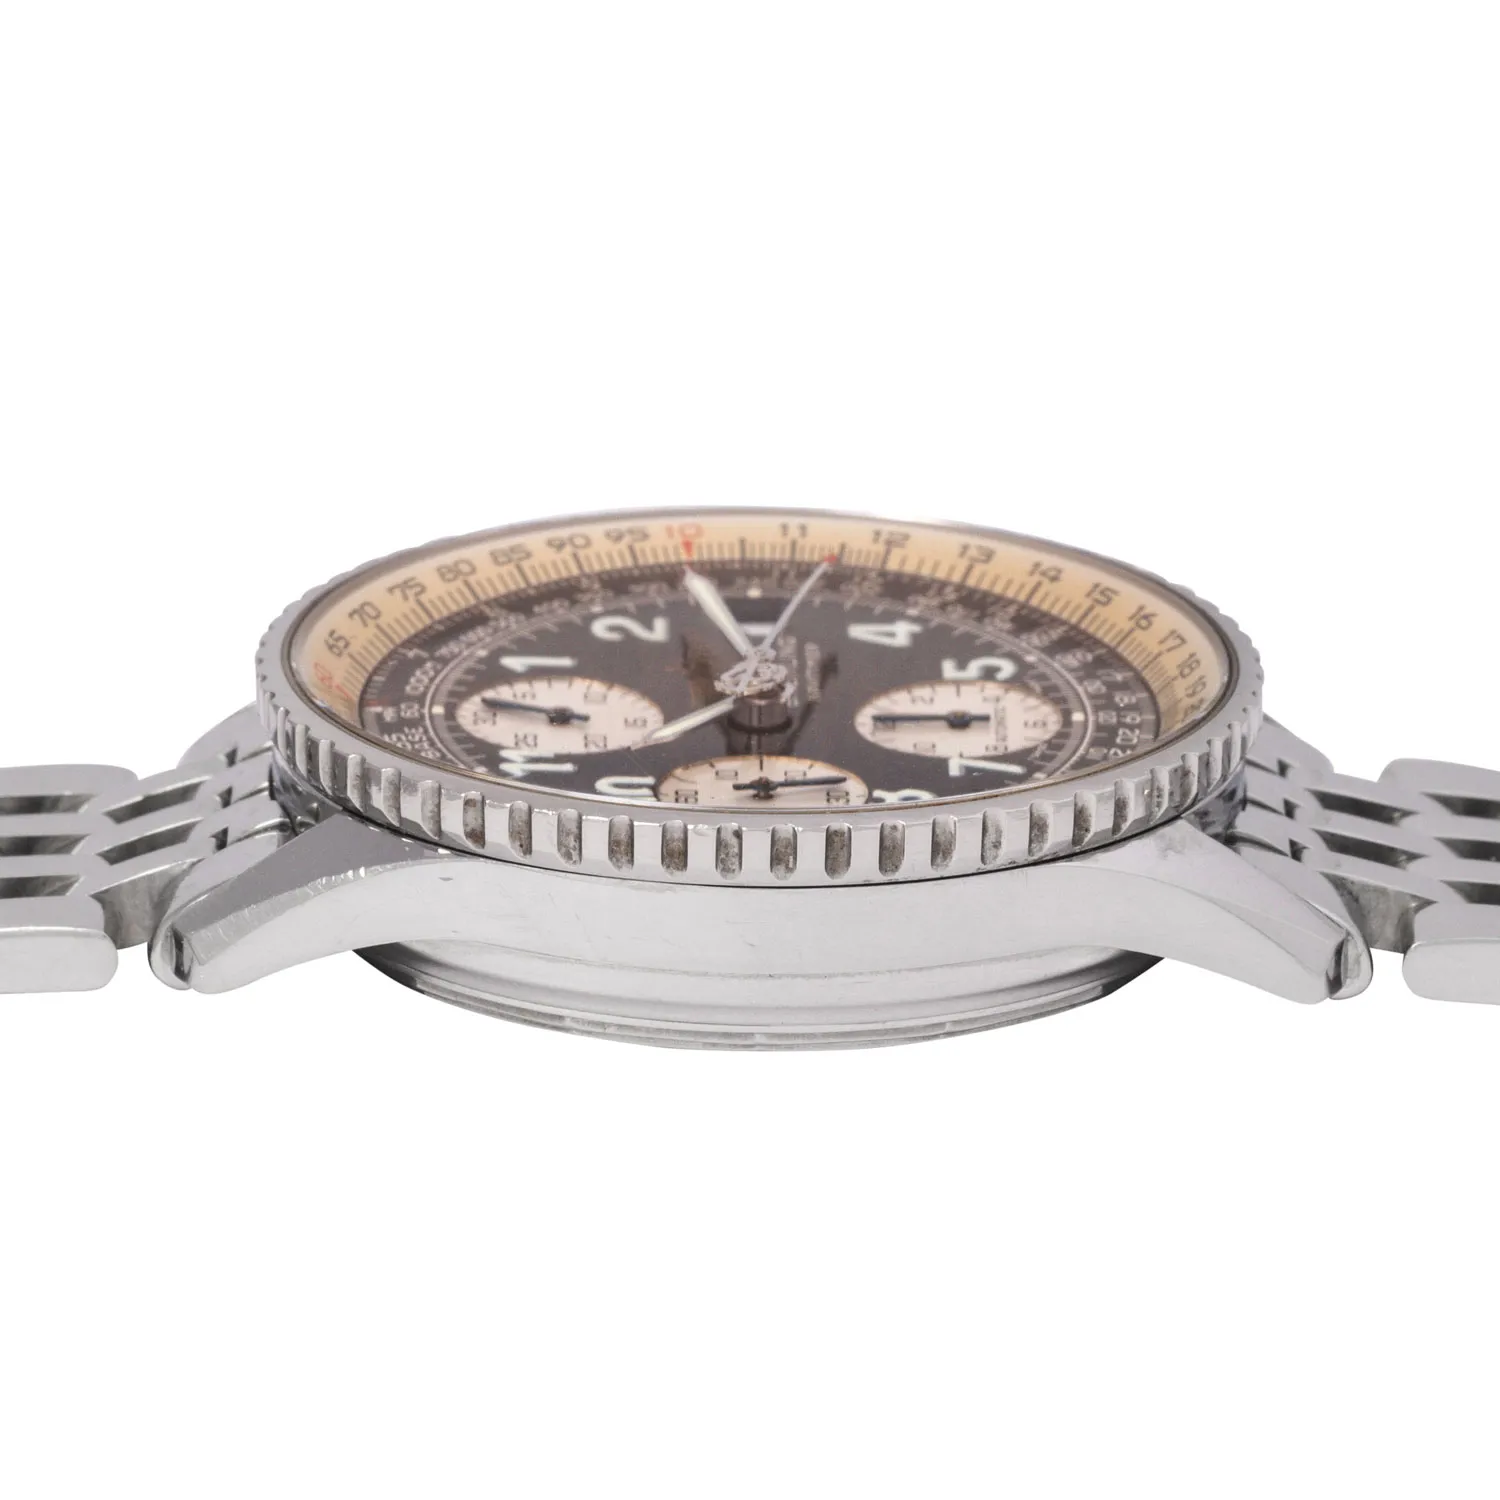 Breitling Old Navitimer A13322-165 41.5mm Stainless steel 3